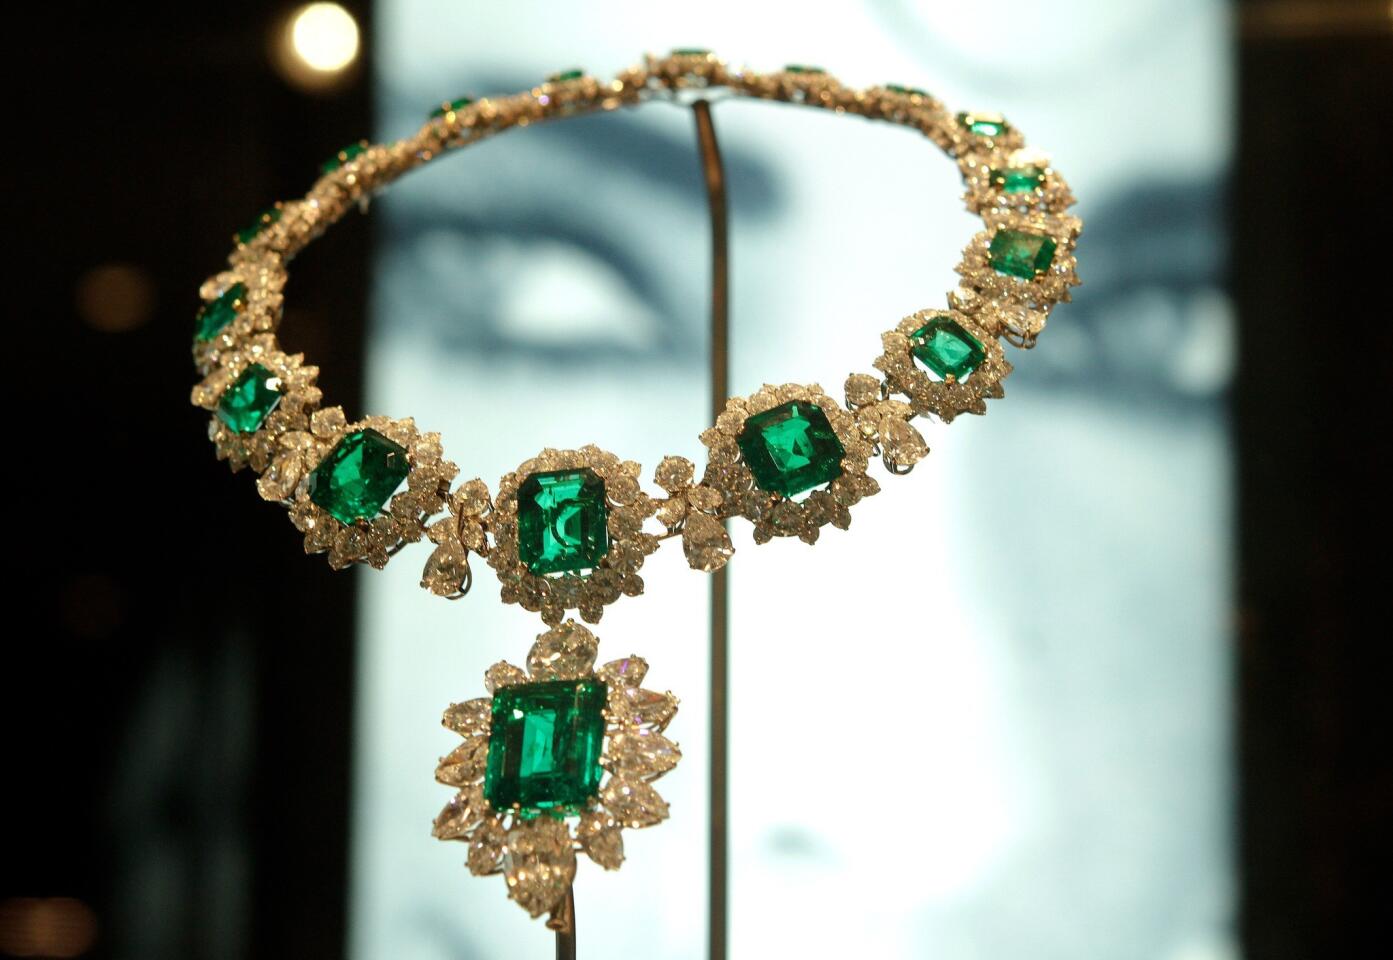 A necklace in platinum and emeralds was a wedding gift from Richard Burton in 1964.